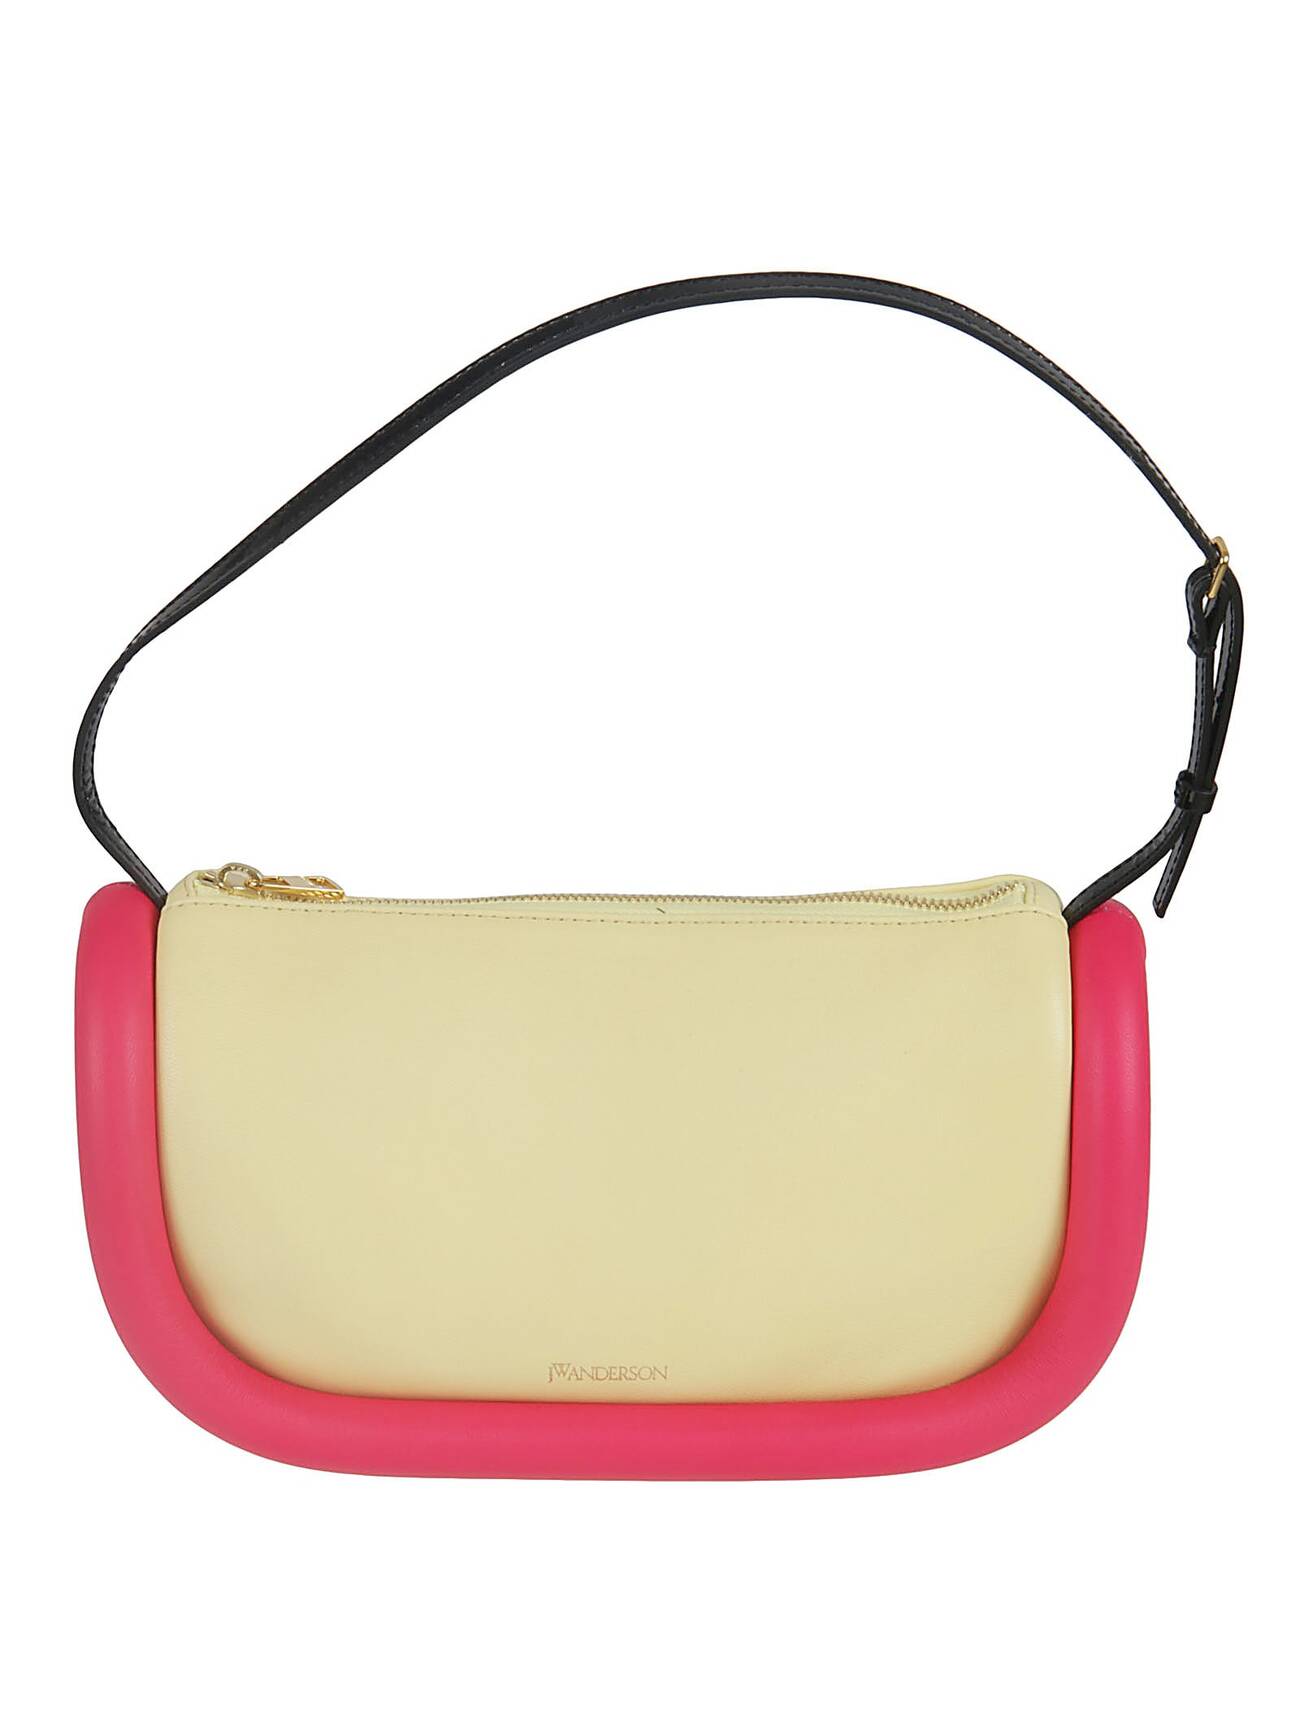 J.W. Anderson The Bumper Baguette Shoulder Bag in pink / yellow